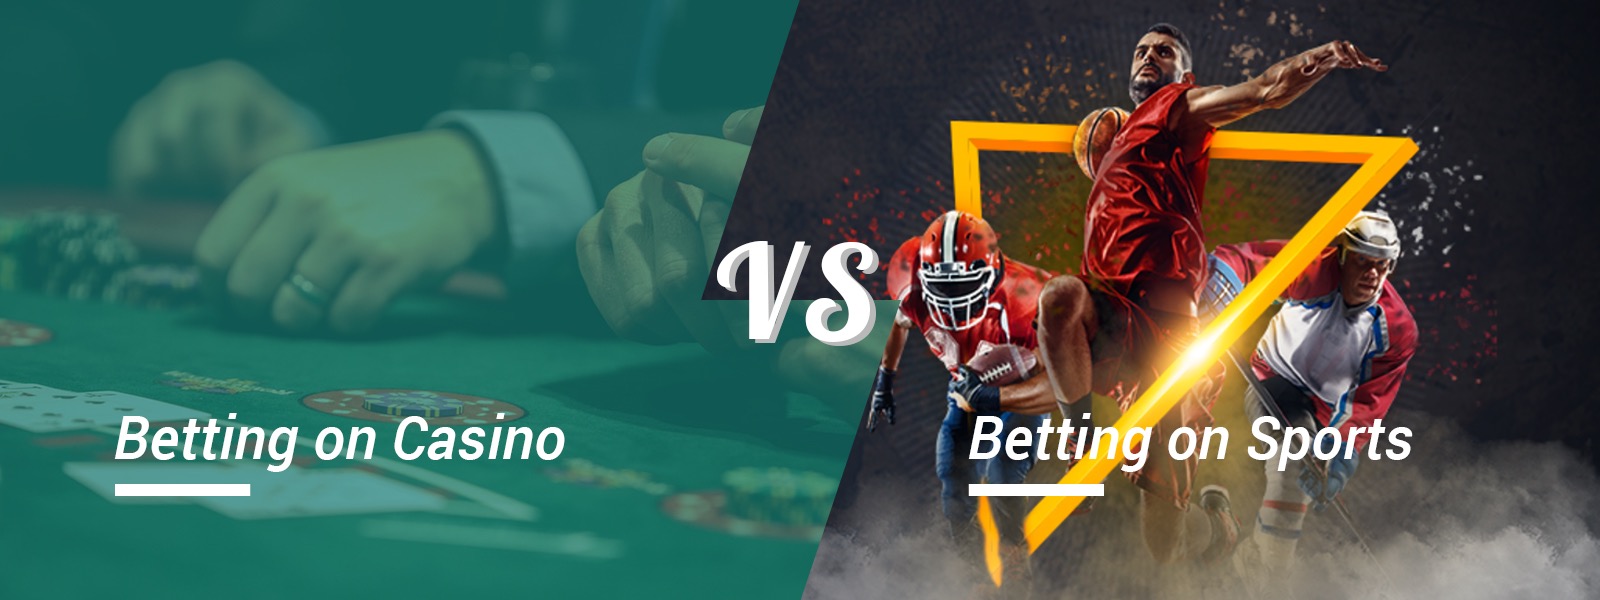 Which Do You Preferred? Betting On Casino Or Sports?